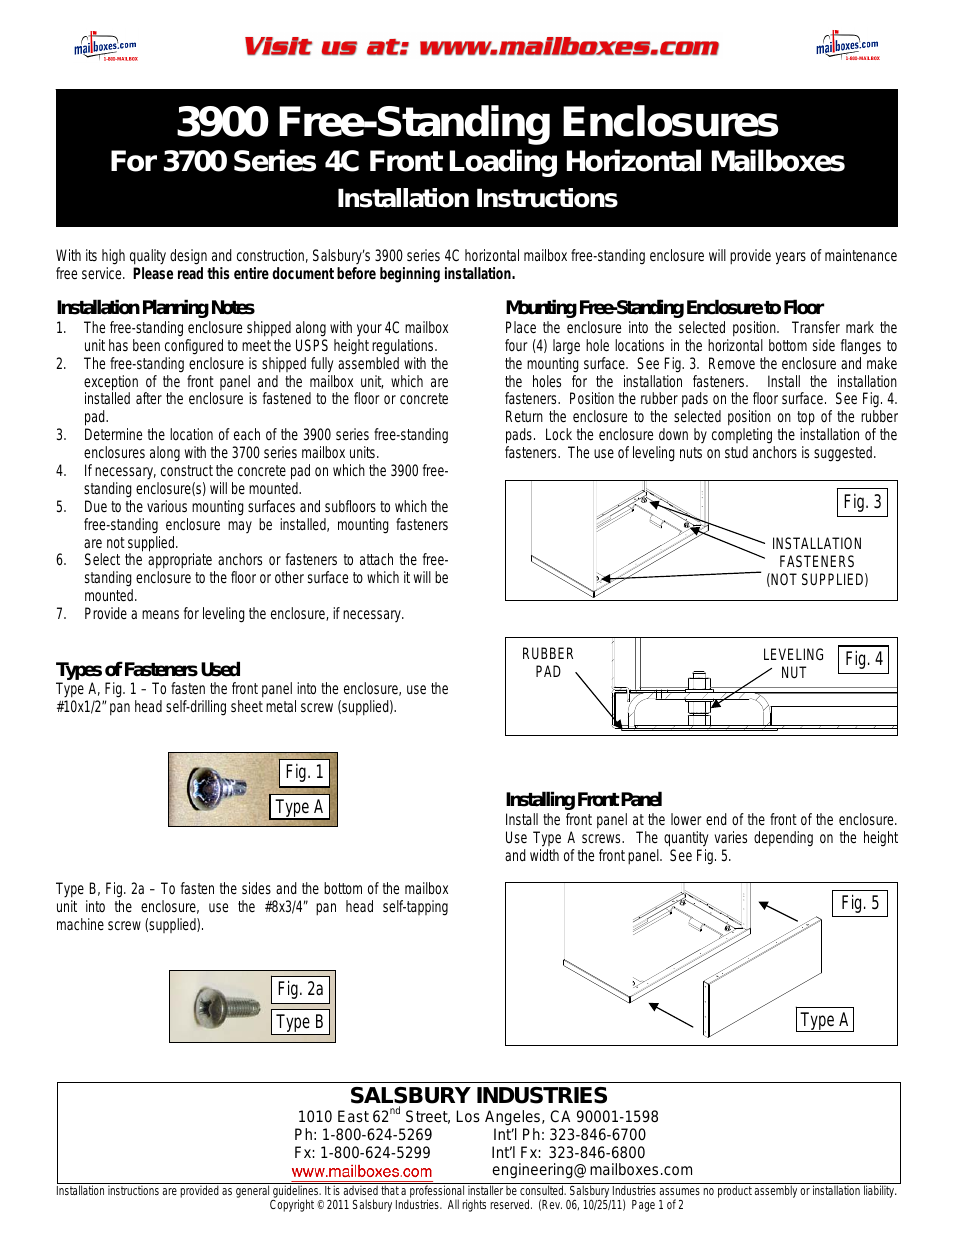 3800 Free-Standing Enclosures For 3700 Series 4C Front Loading Horizontal Mailboxes